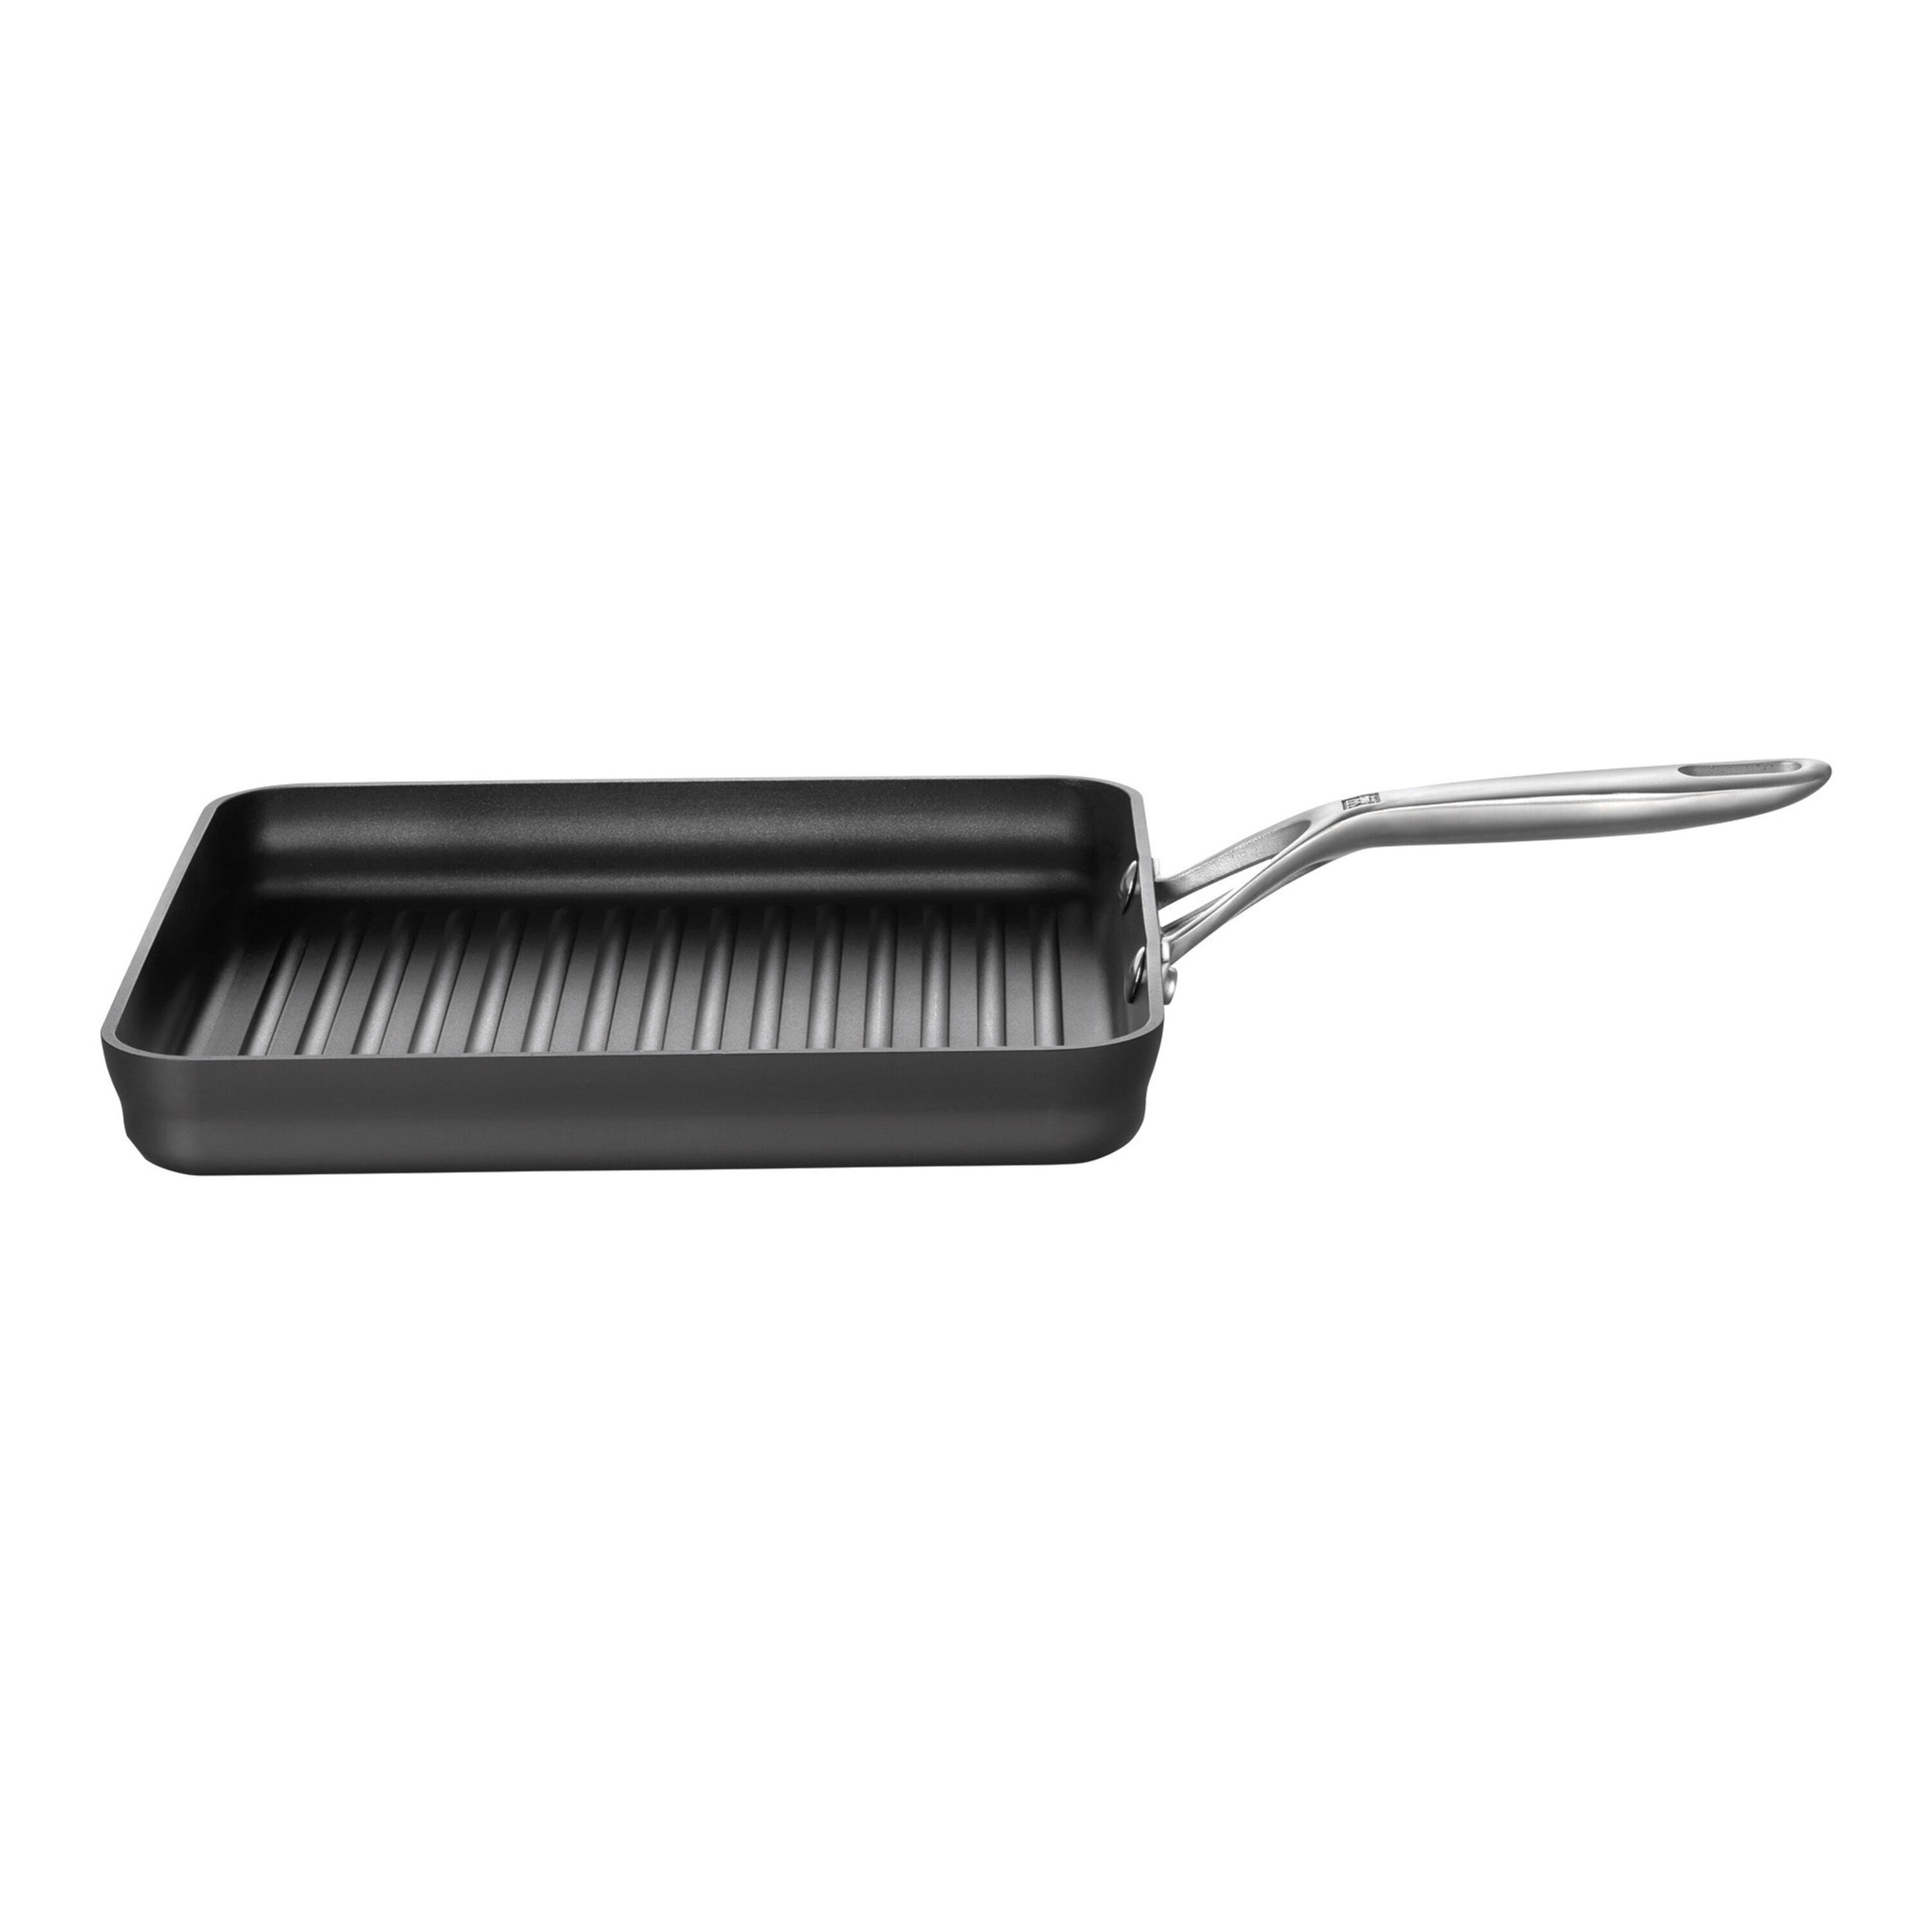 Order a Nonstick Grill Pan That Provides Easy Turning